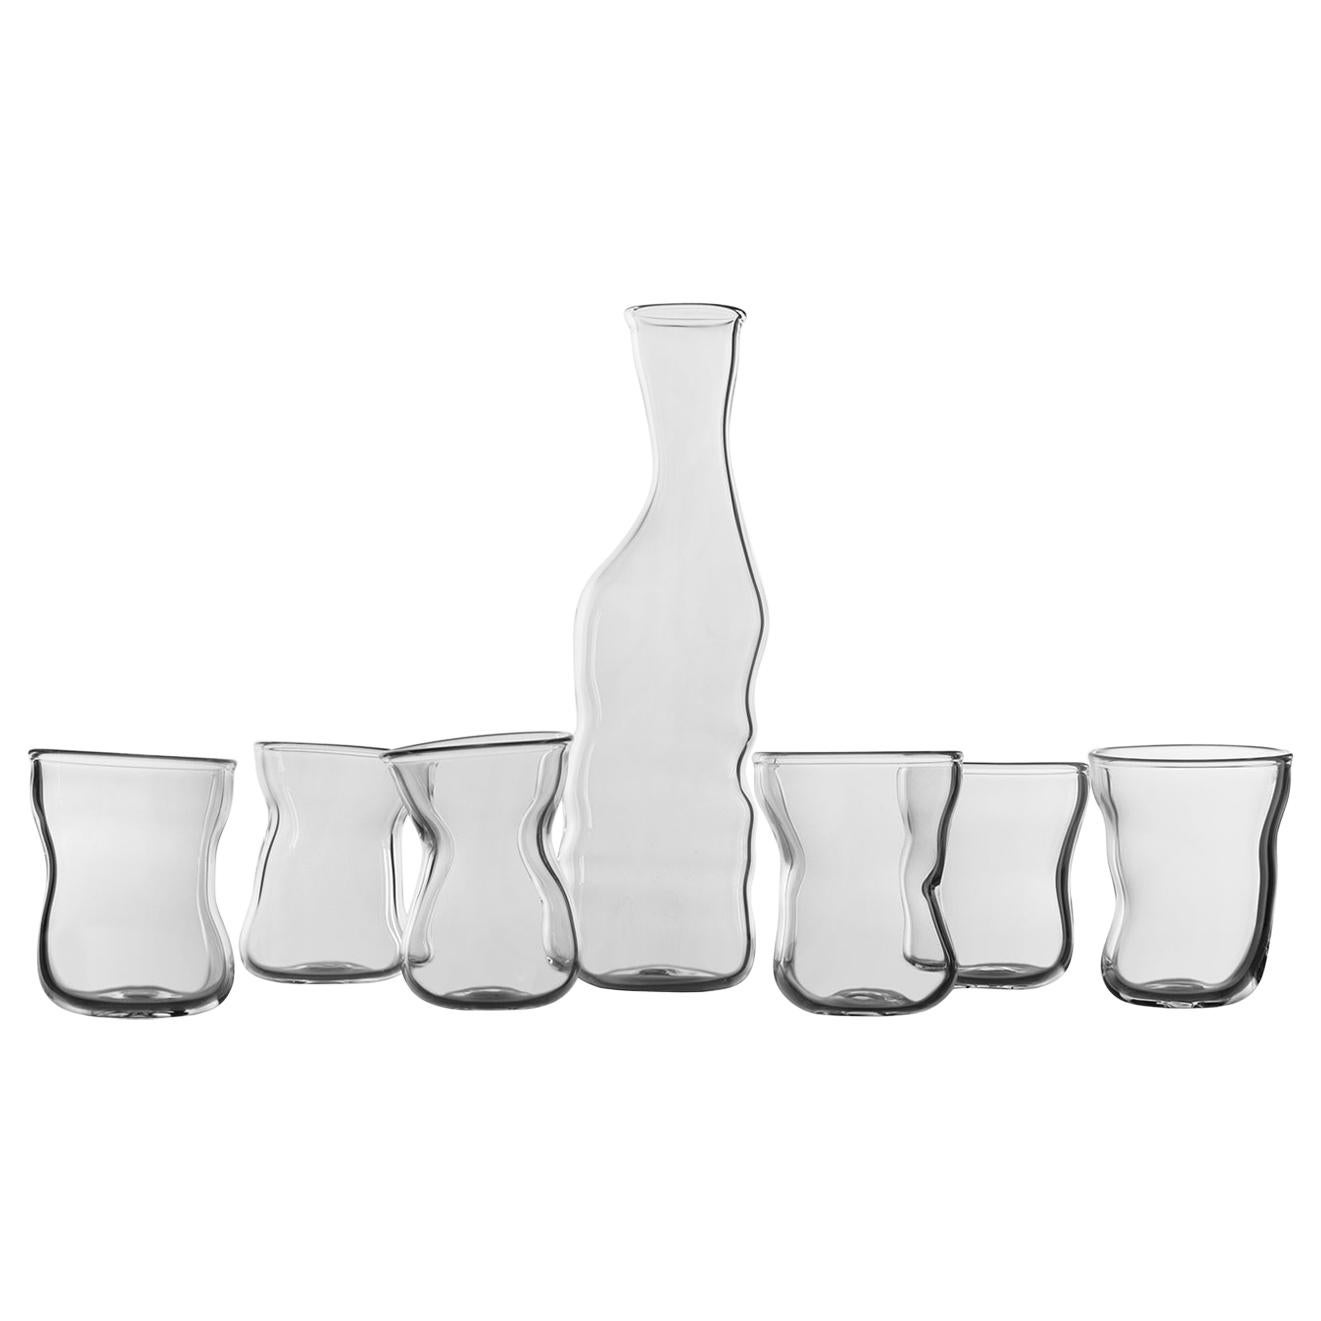 "Storti Set" Hand Blown Glasses and Bottle by Simone Crestani